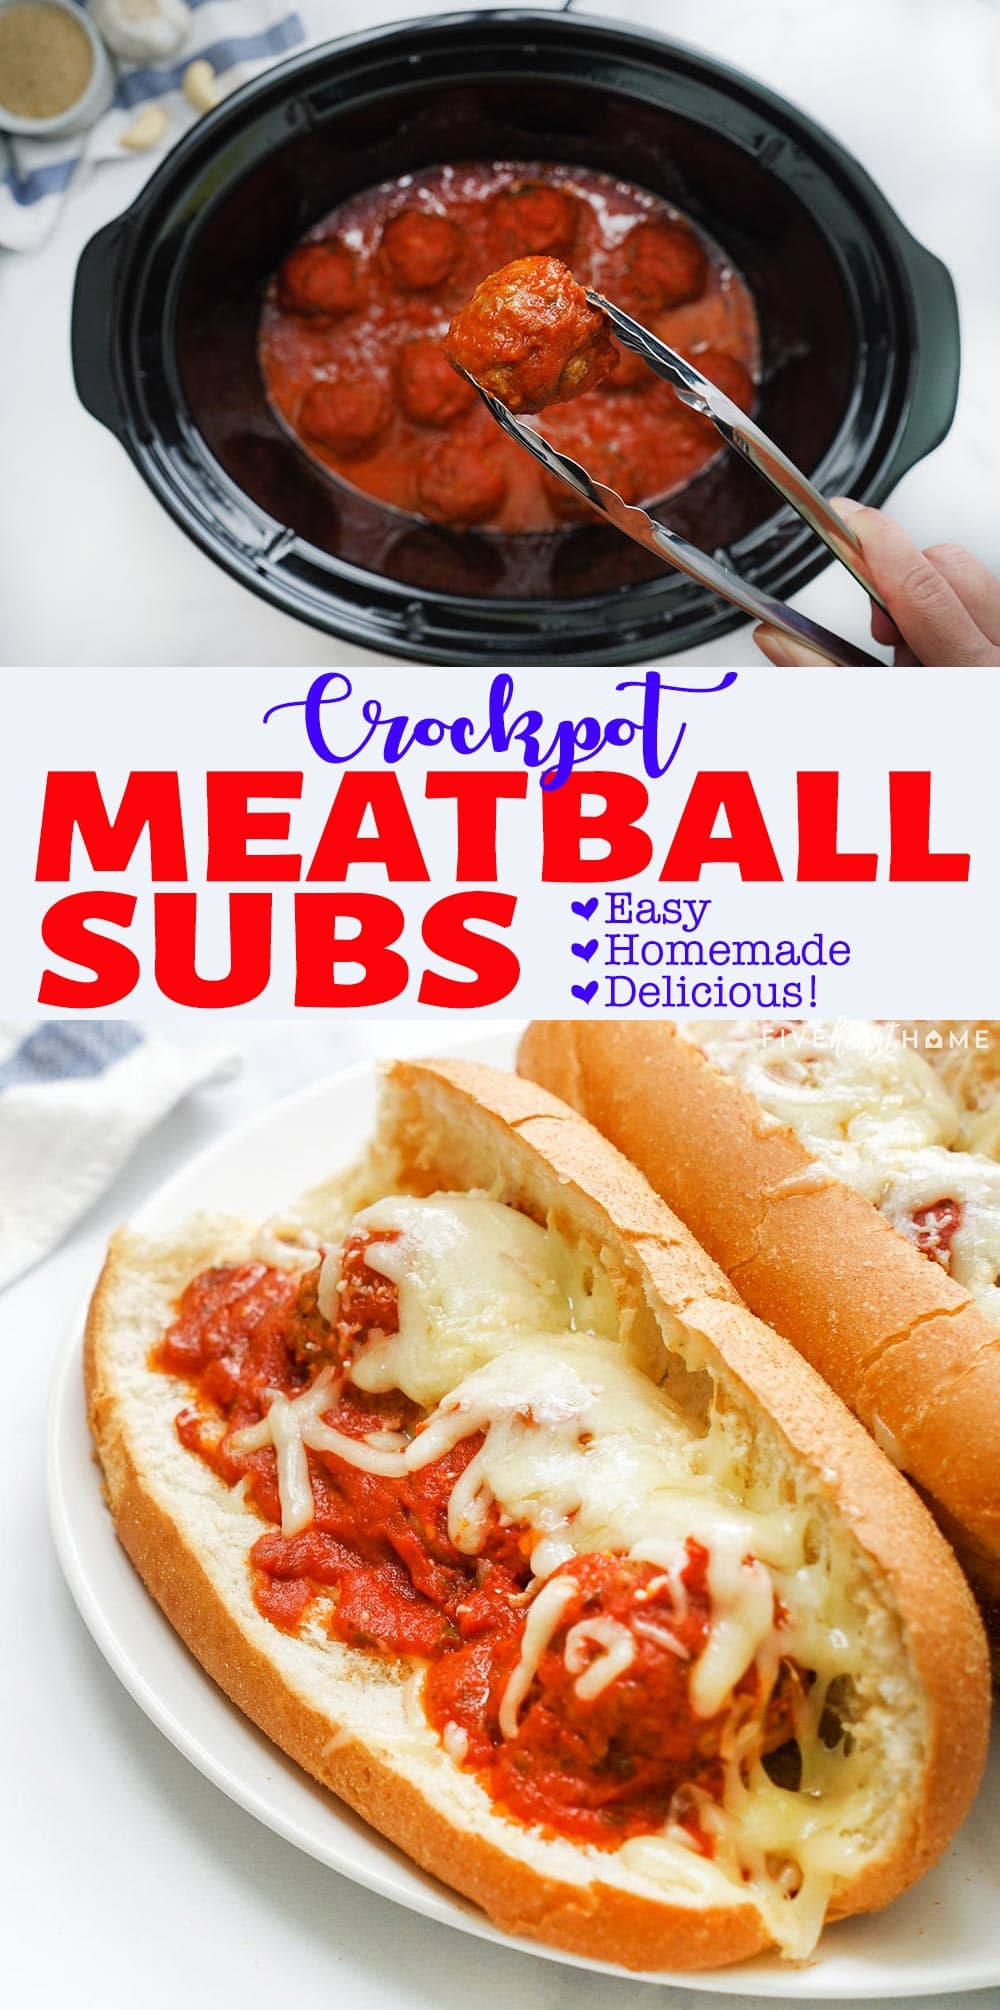 Crockpot Meatball Subs effortlessly come together in the slow cooker for flavorful, saucy, cheesy sandwiches that the whole family will love! With just a few simple ingredients, this meatball sub recipe is homemade, easy, and delicious! | FiveHeartHome.com via @fivehearthome